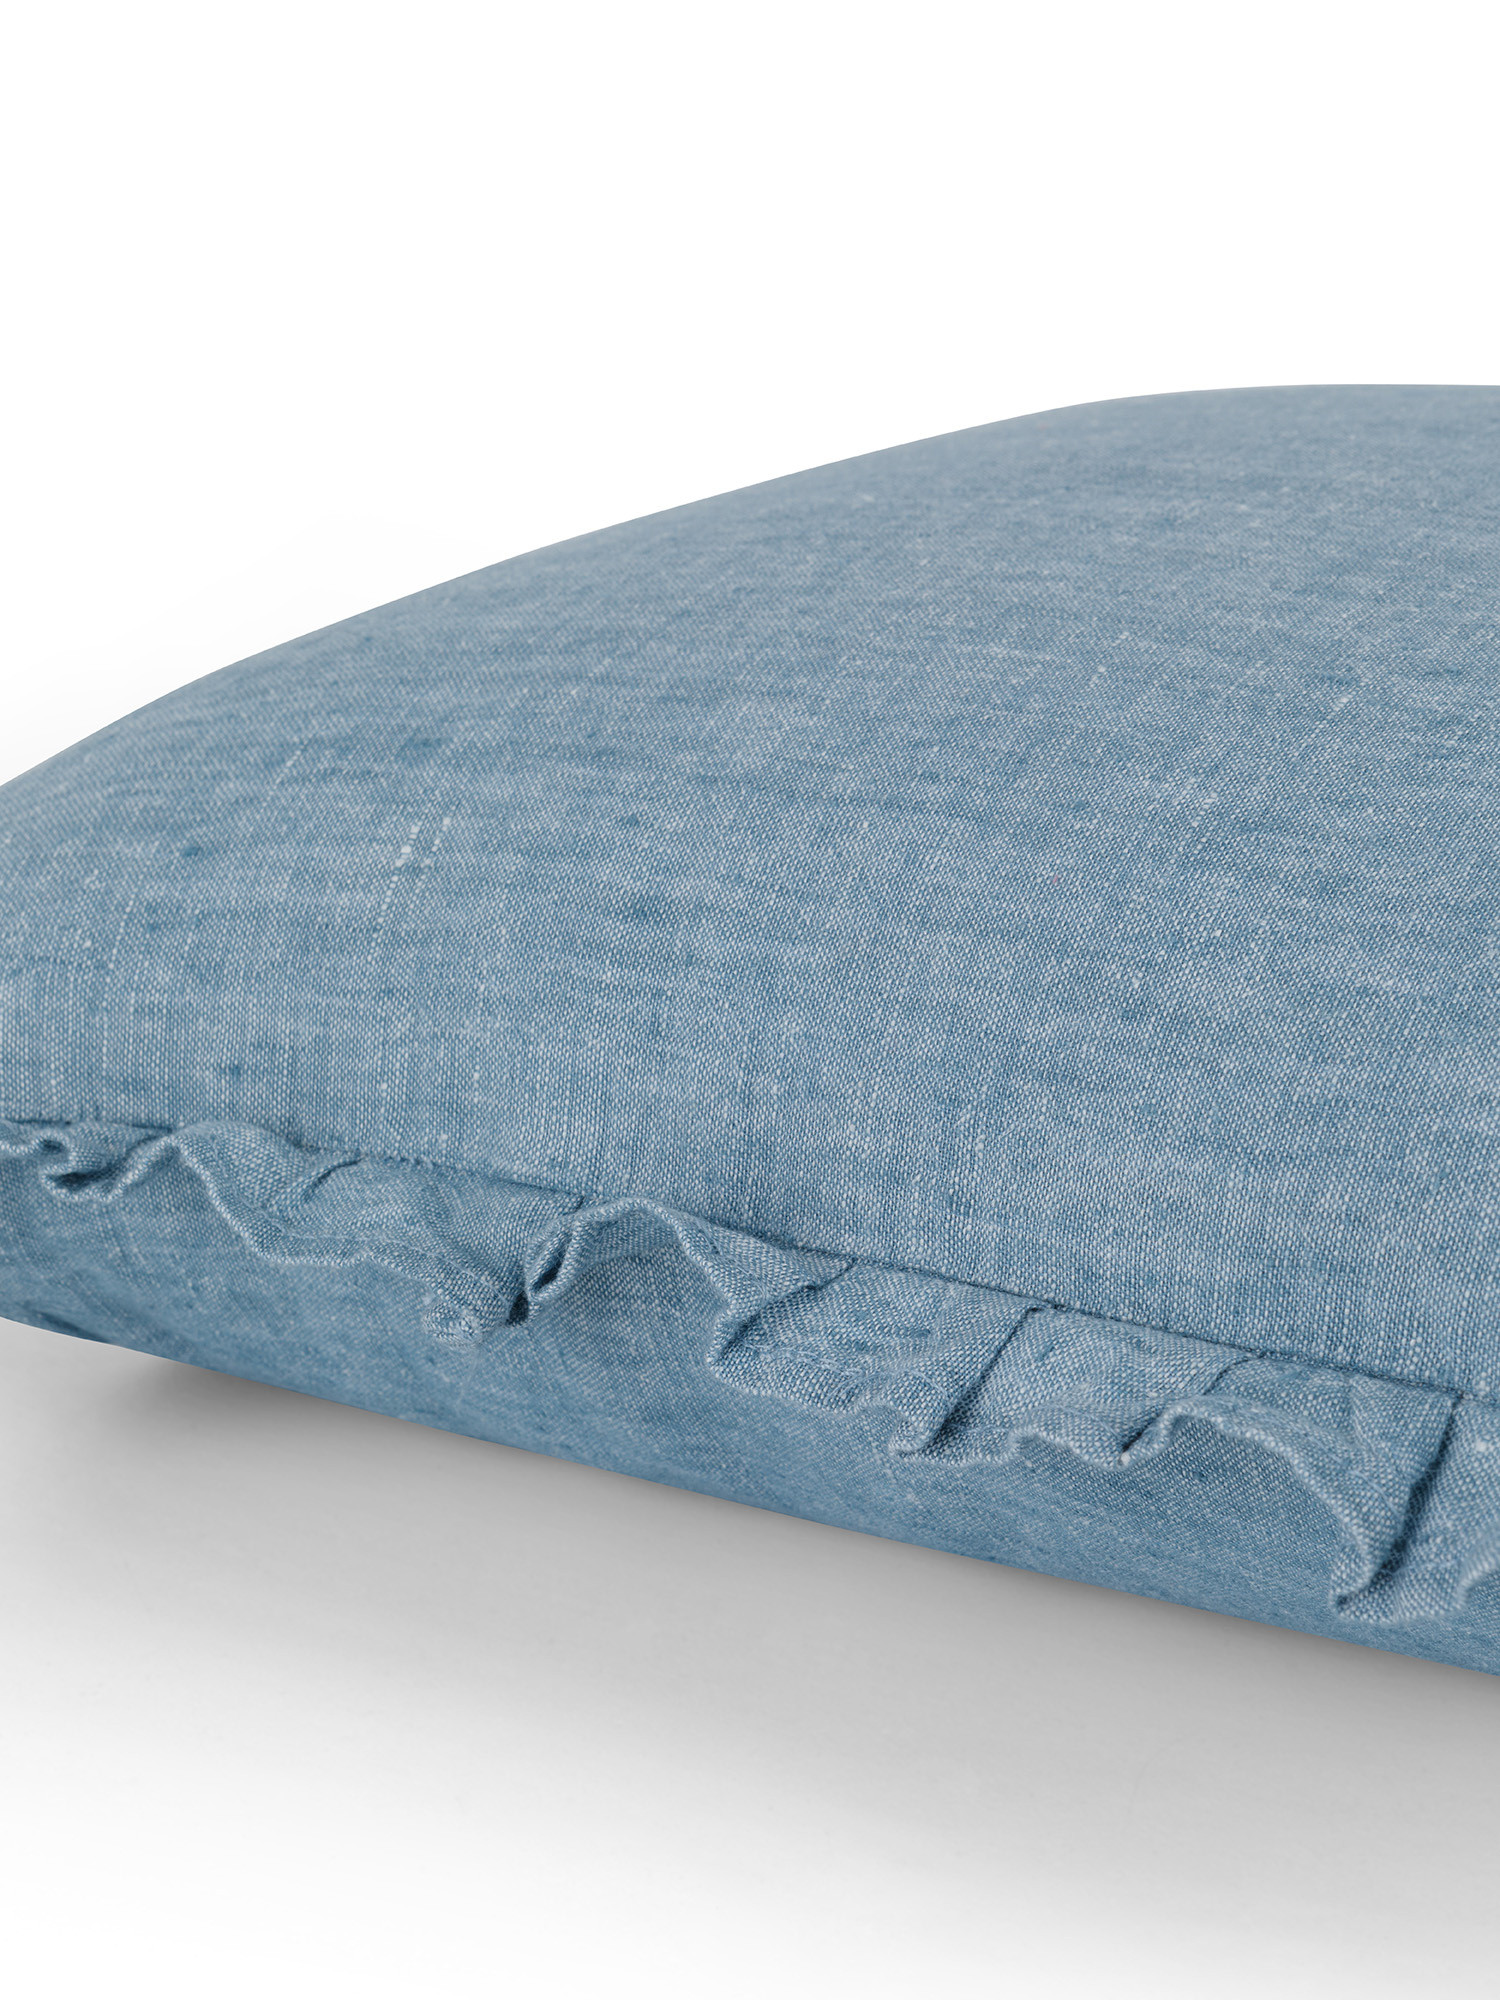 Striped cushion in pure linen 40x40 cm, Light Blue, large image number 2